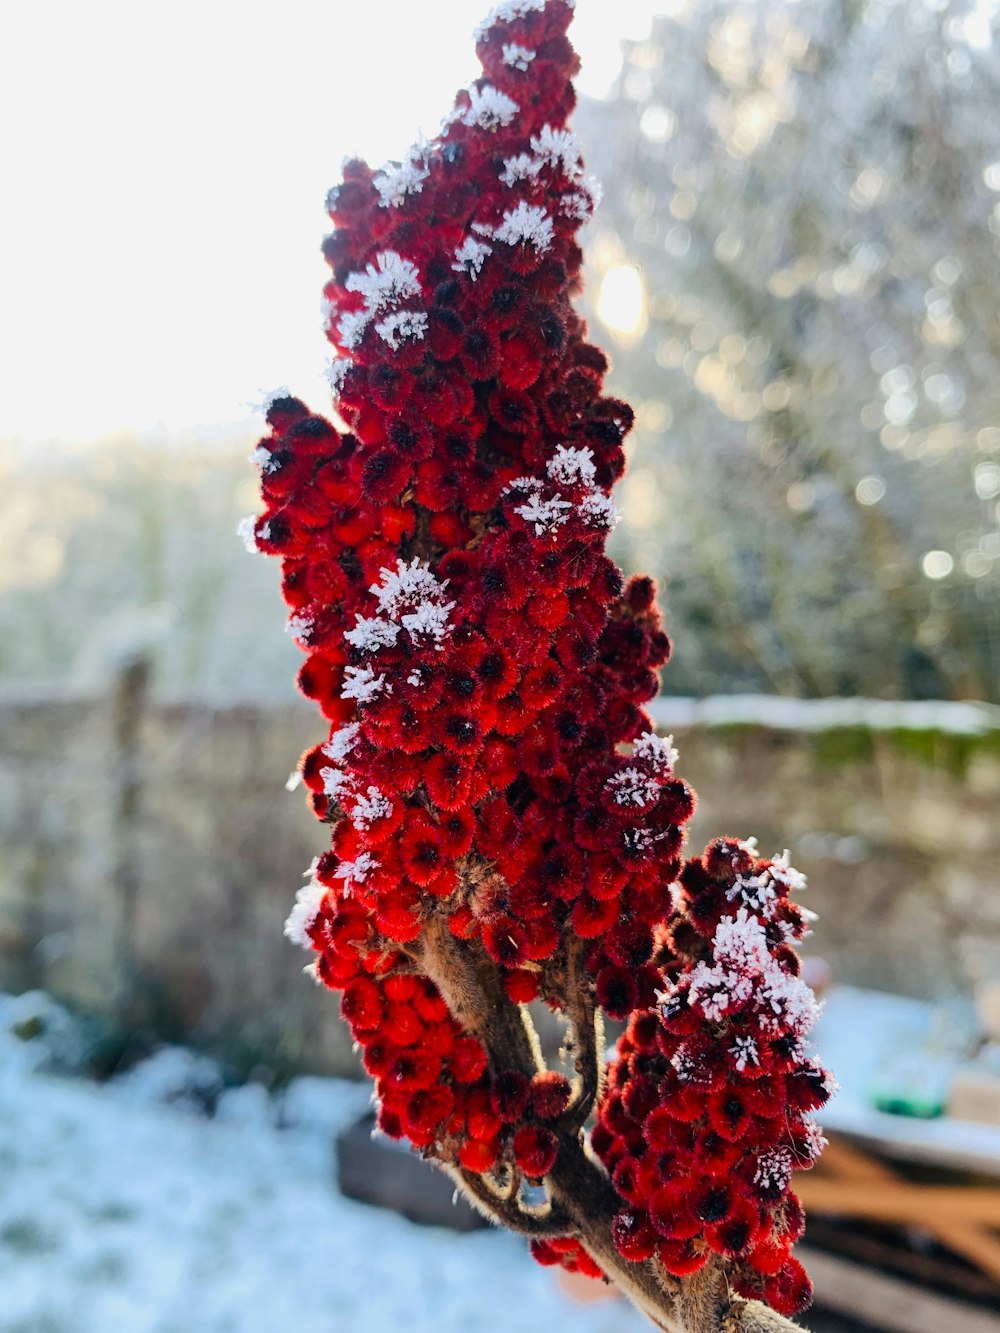 a red flower with snow on the ground